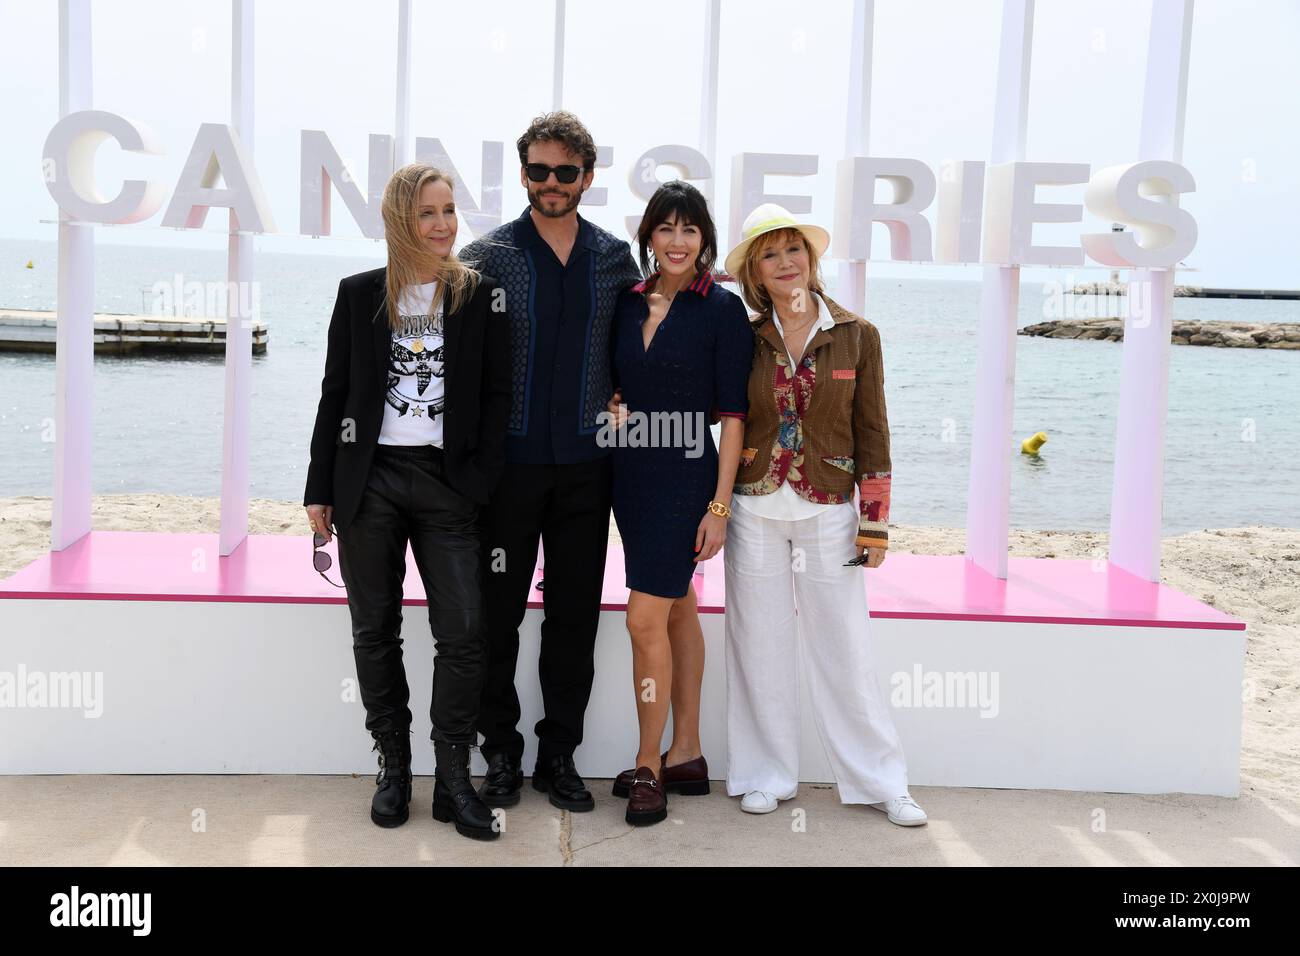 CANNES, FRANCE - APRIL 07: (L-R) Catherine Marchal, Arnaud Binard, Nolwenn Leroy and Marie-Anne Chazel attends the 'Brocéliande' Photocall during the Stock Photo